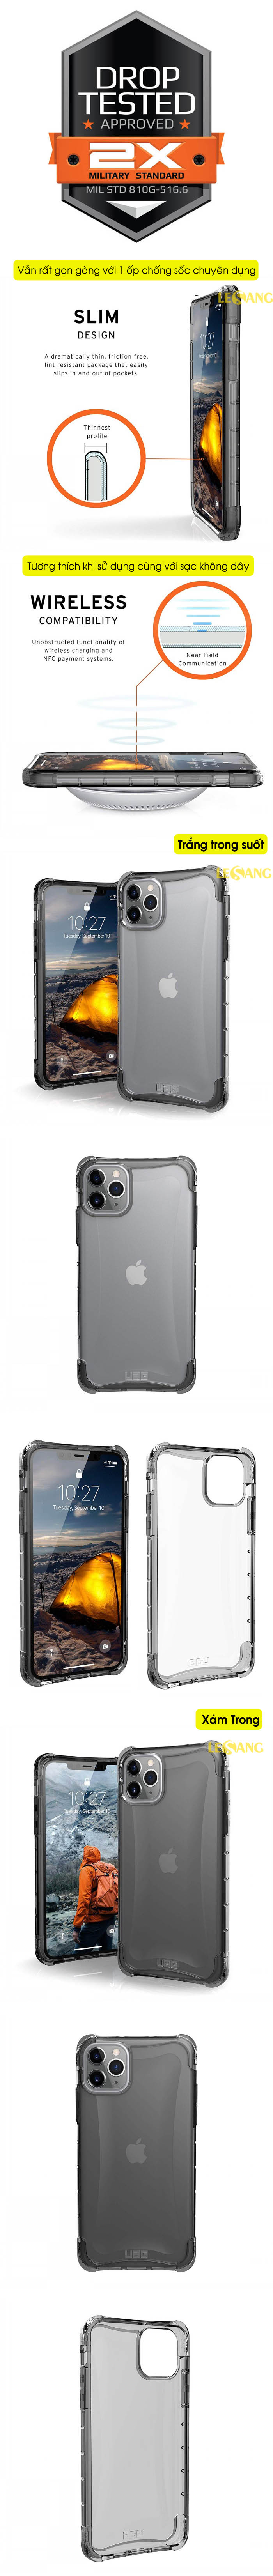 Ốp lưng iPhone 11 Pro UAG Plyo trong suốt 5